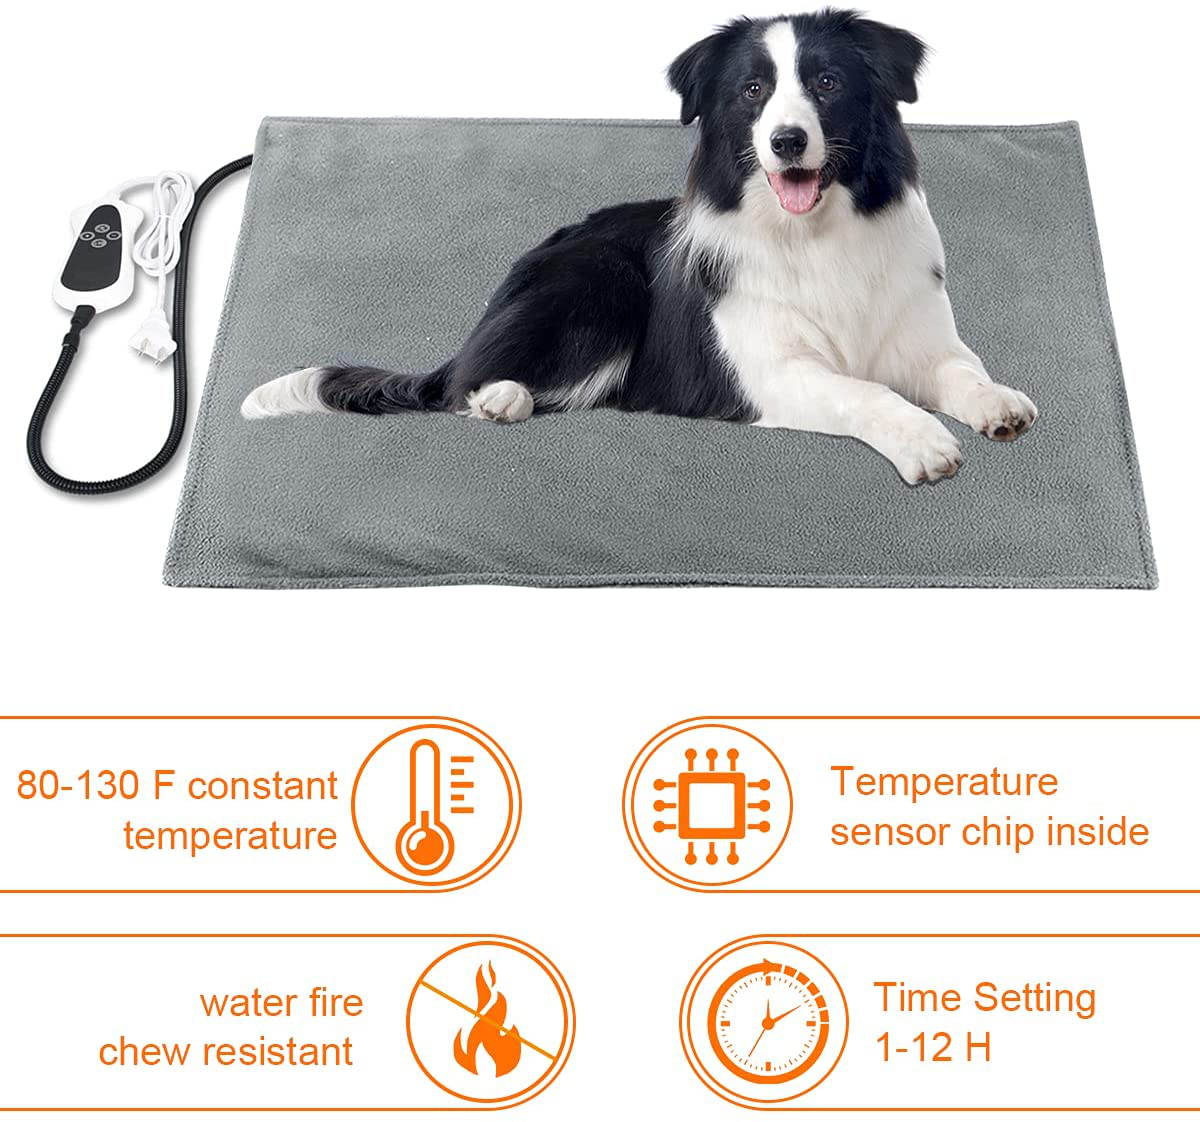 RIOGOO Pet Heating Pad, Upgrade Dog Cat Warming Pad with Timer, Safety Electric Dog Cat Heating Pad Waterproof